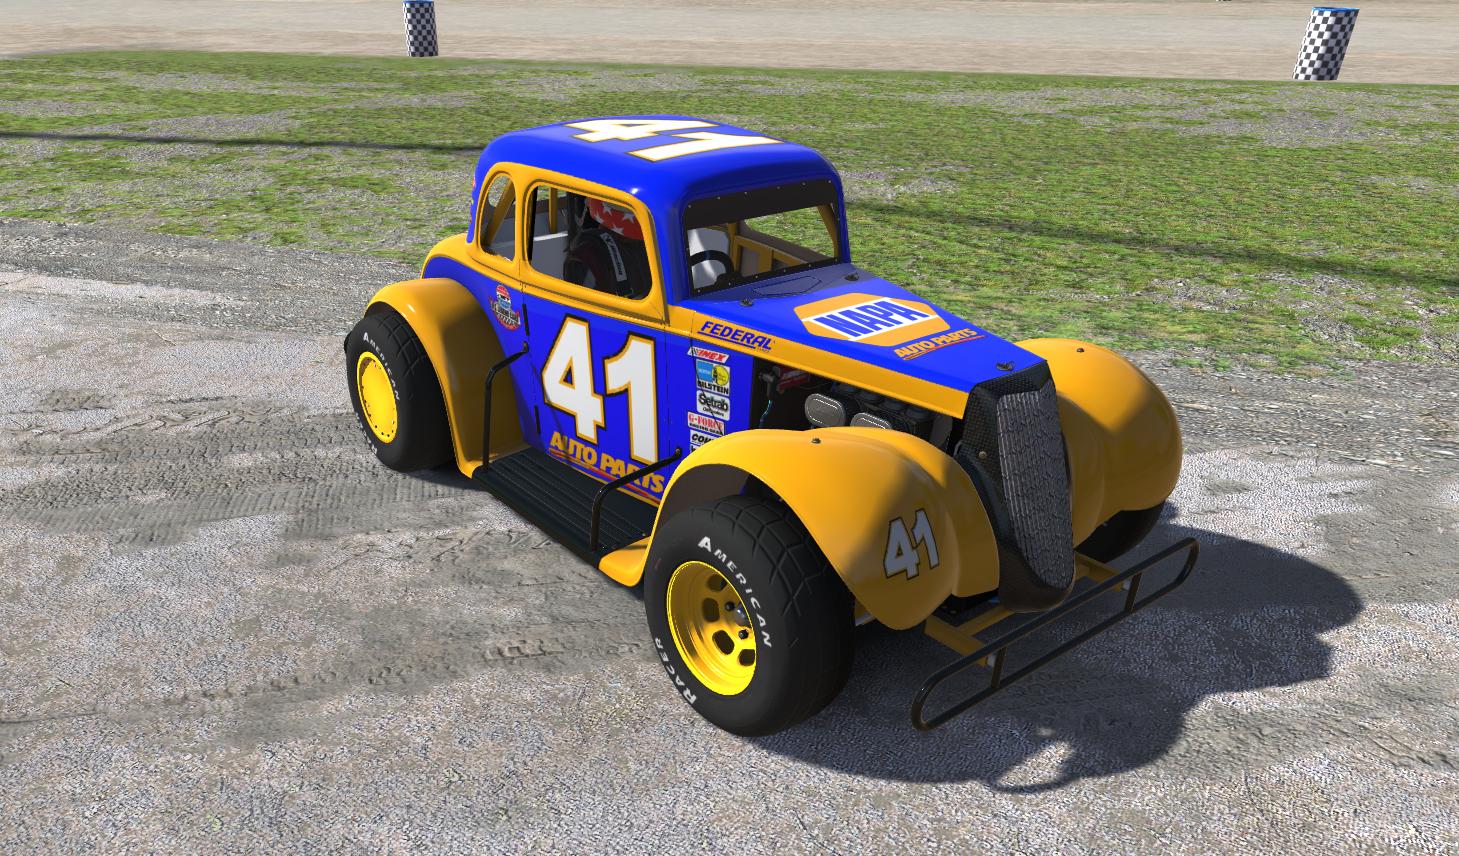 Legends Ford34c Dirt Napa by Doug Turner - Trading Paints